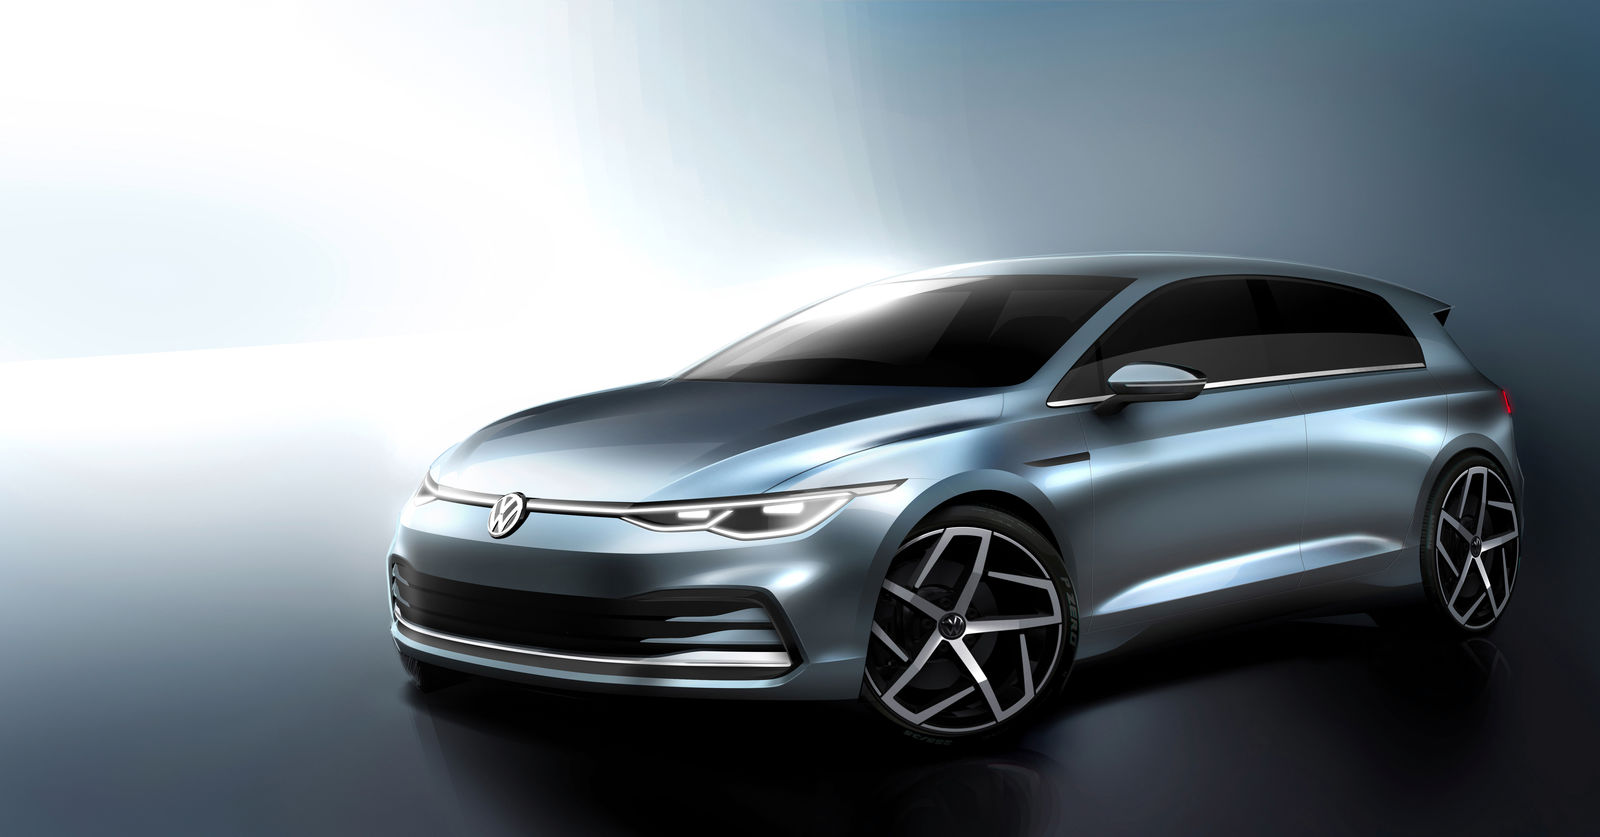 The all-new Golf (design sketch)